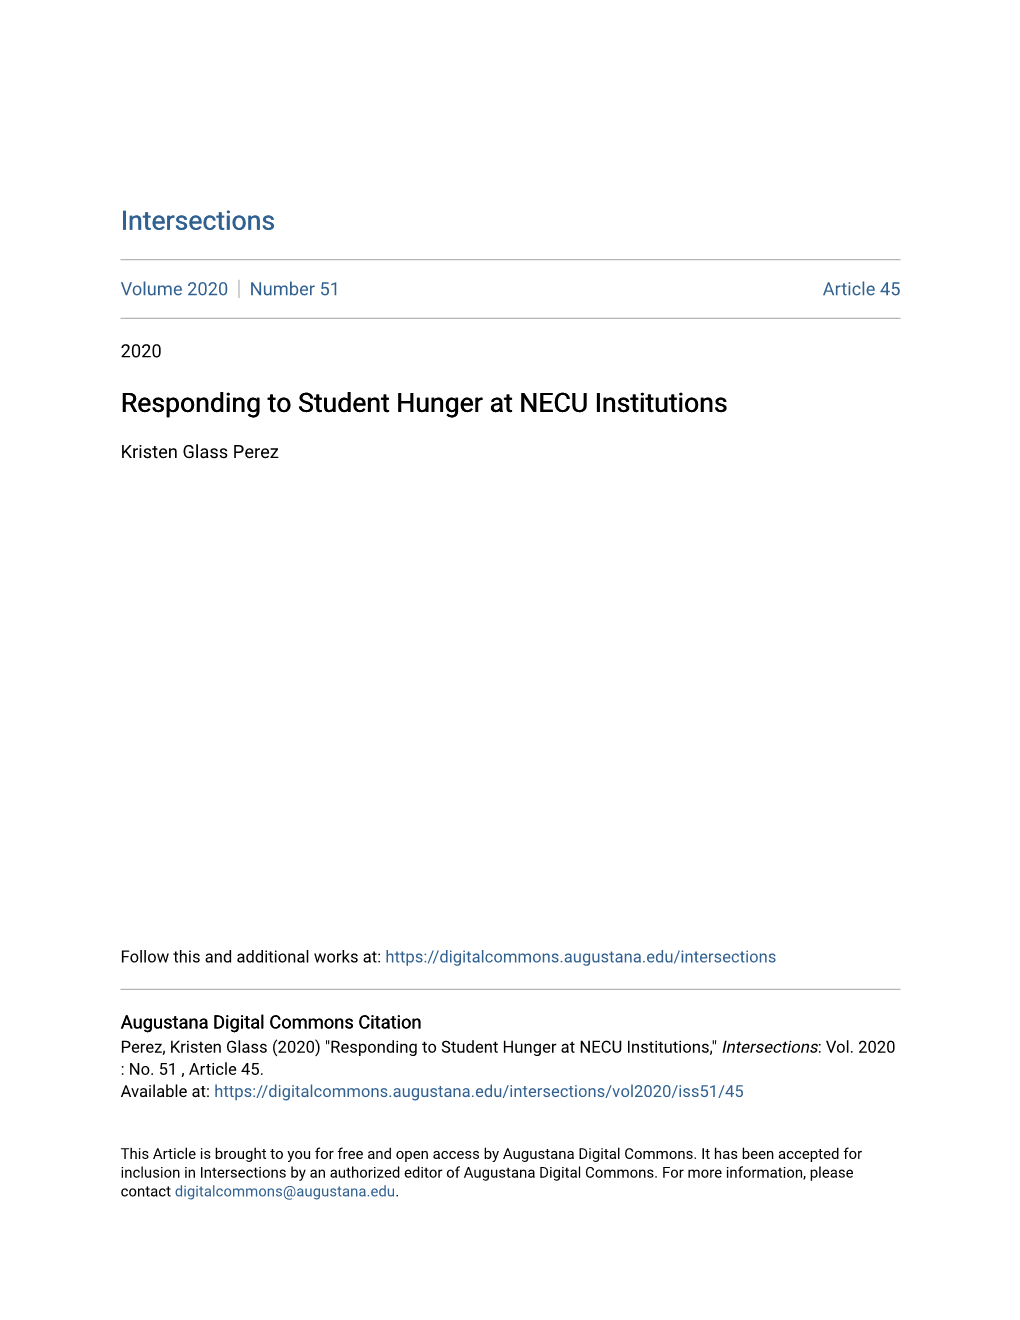 Responding to Student Hunger at NECU Institutions